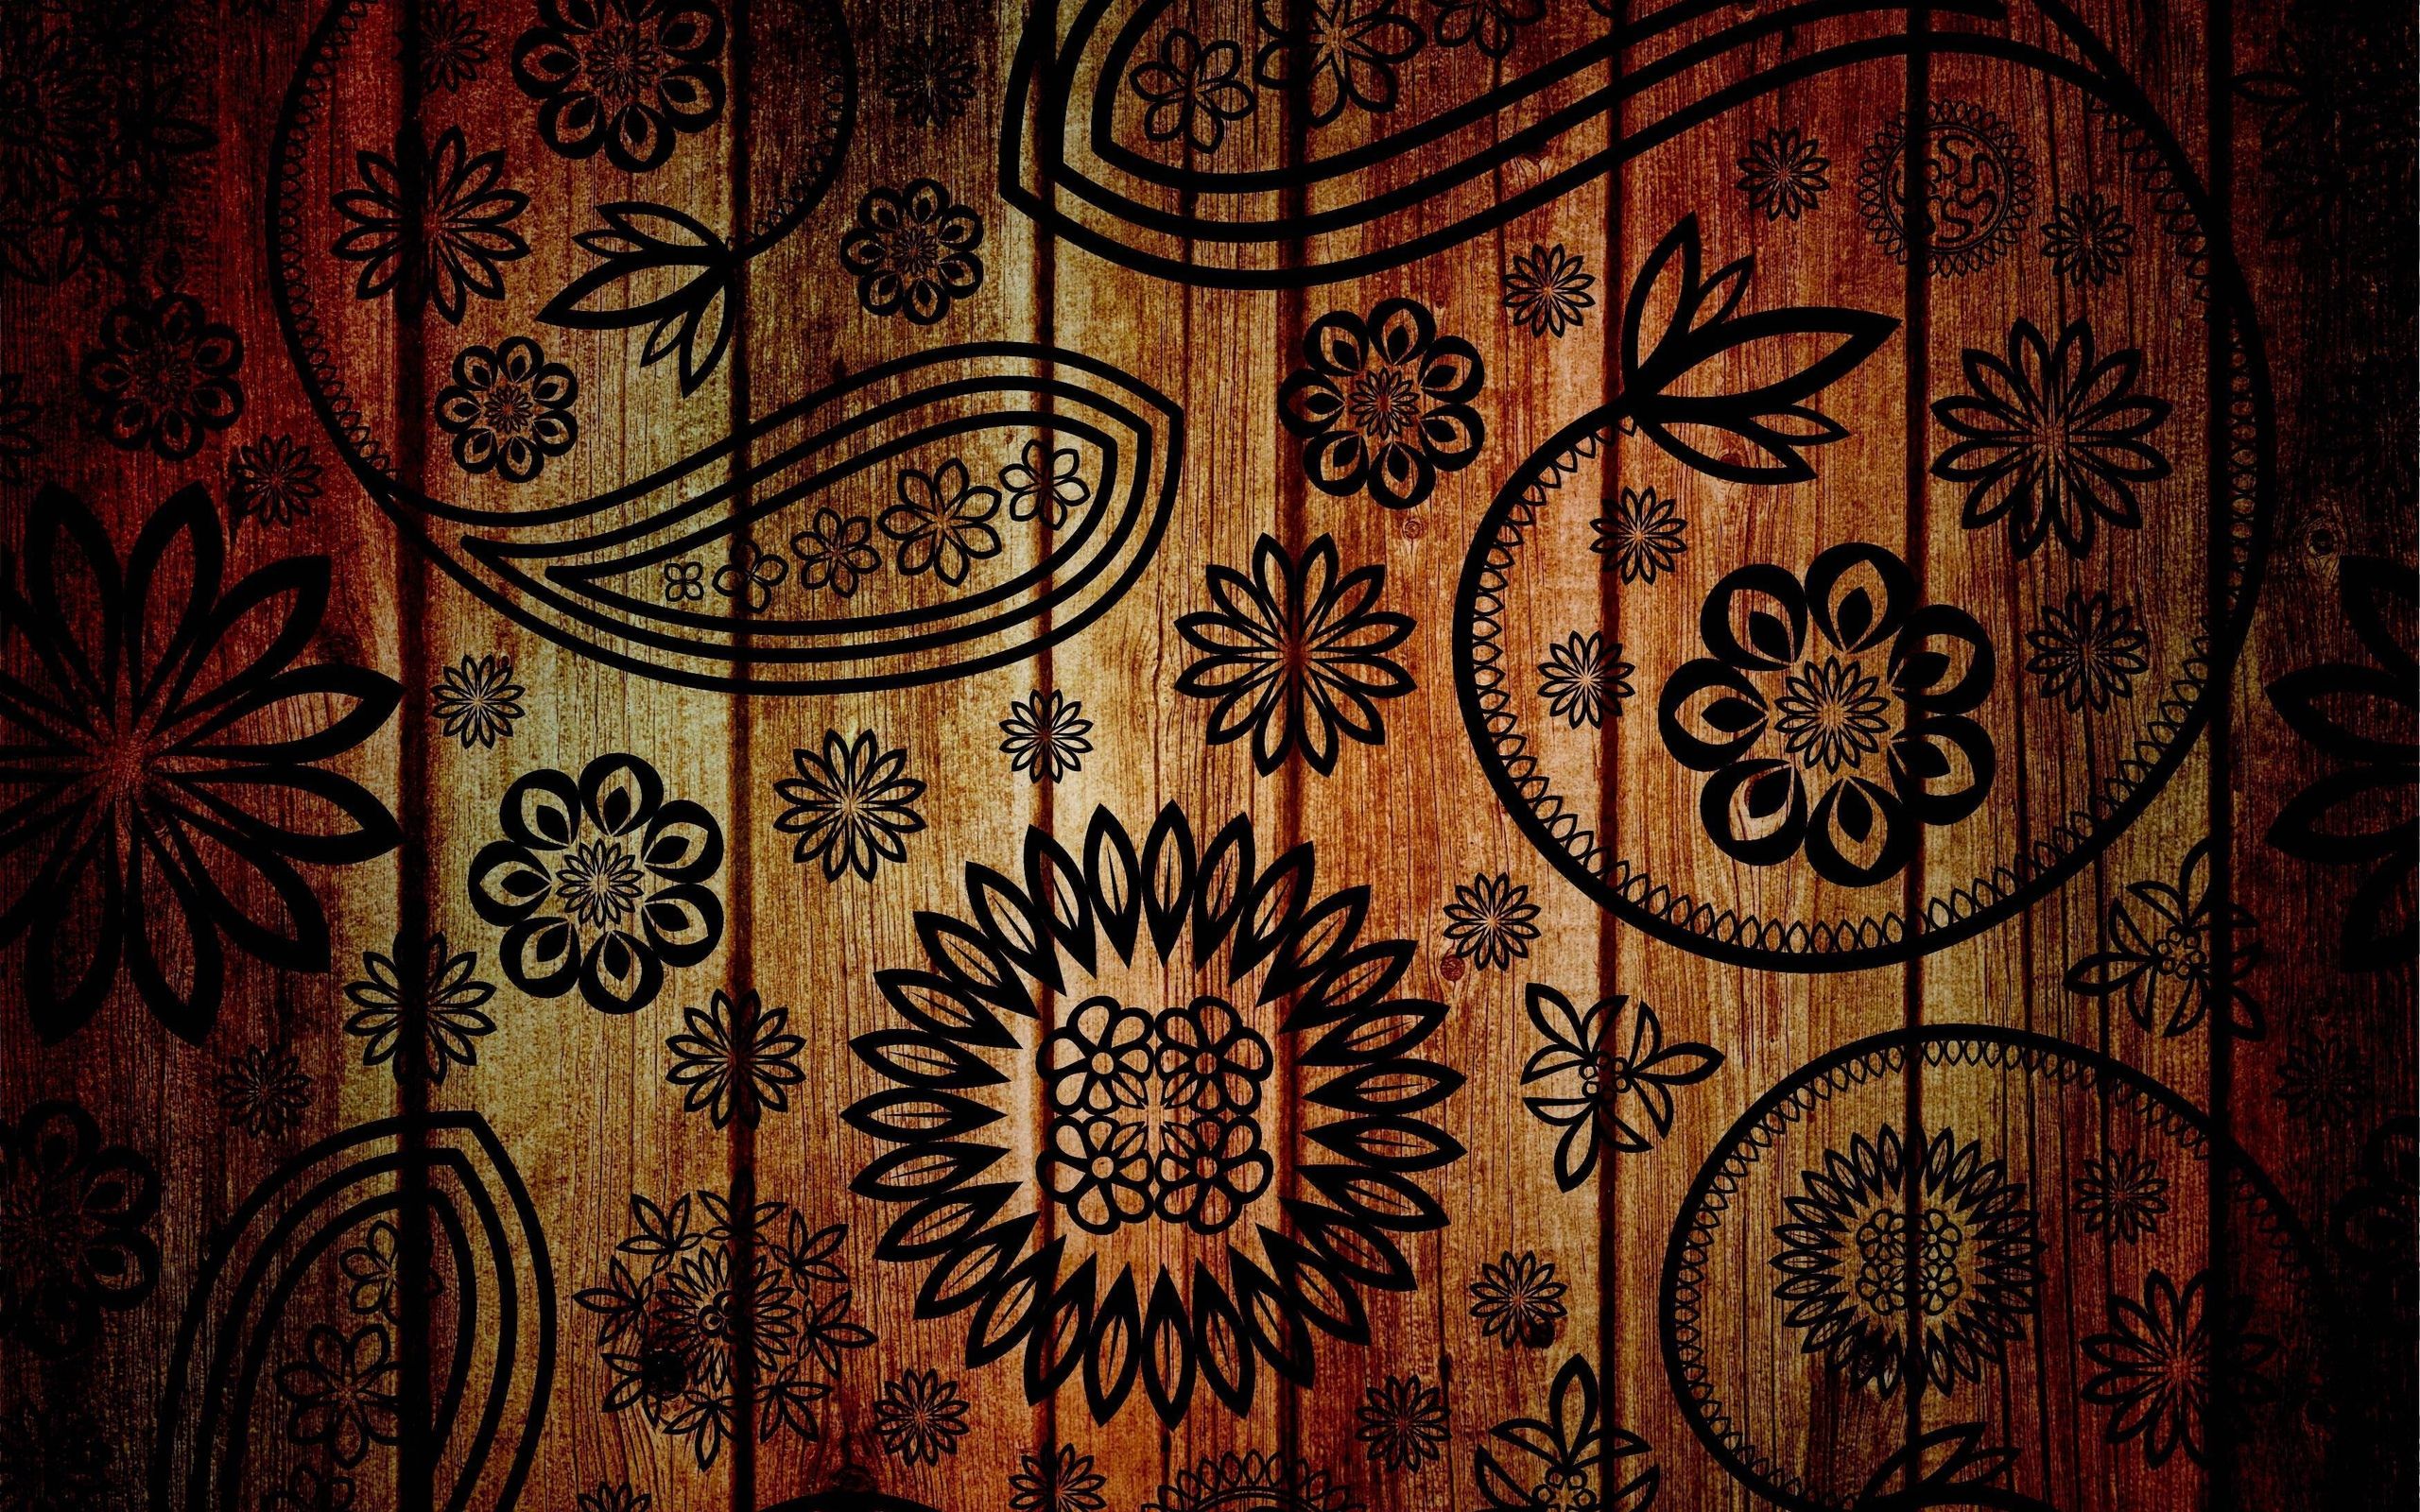 Wood HD Wallpaper and Background Image